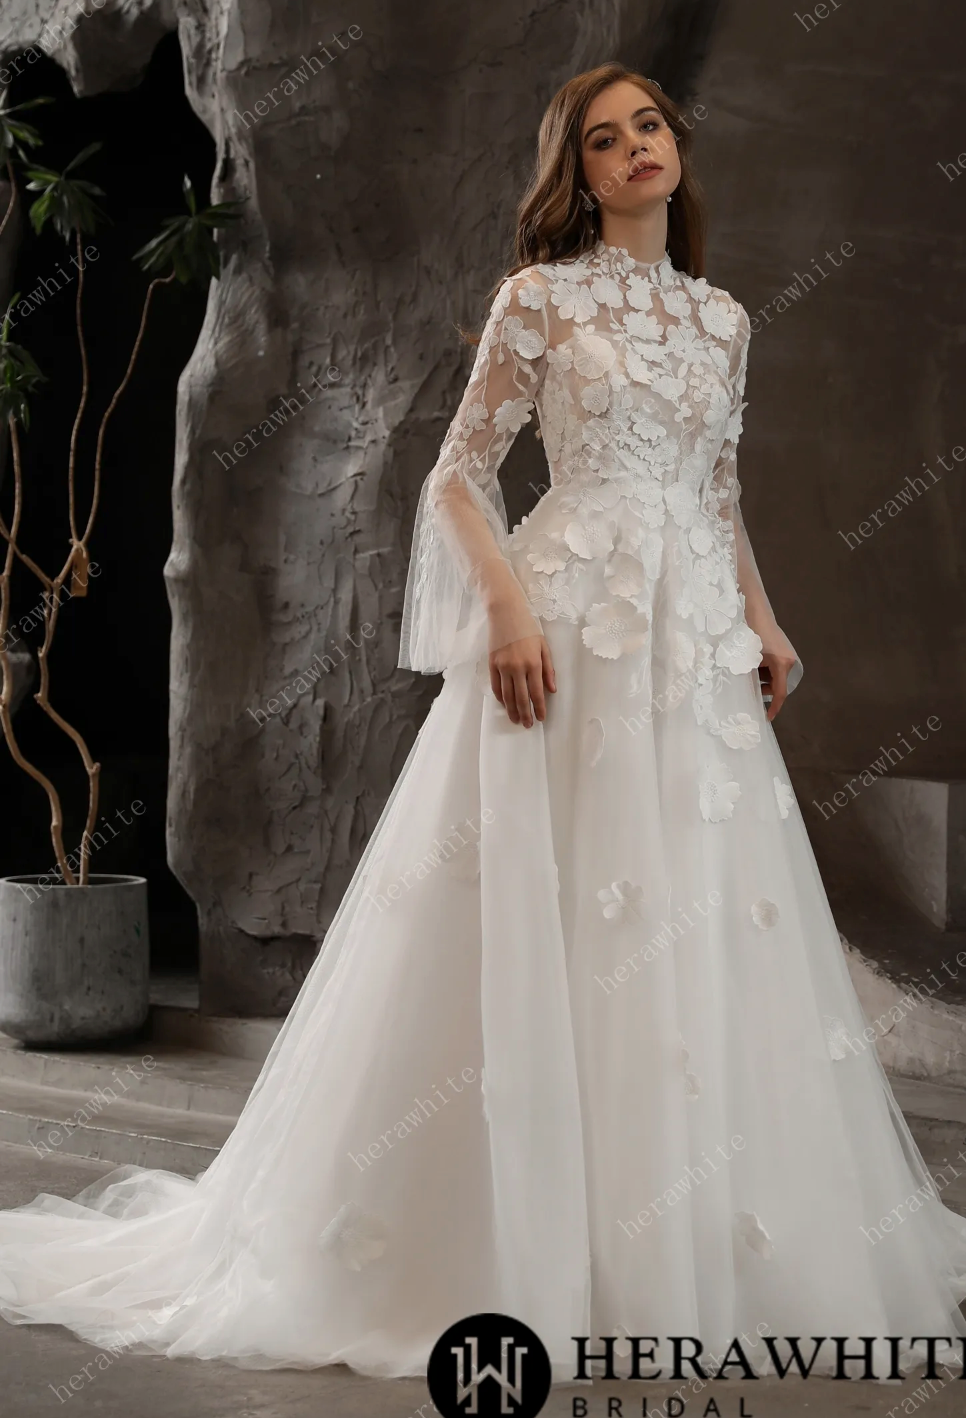 Illusion High Neck Bridal Gown with Lovely 3D Floral Lace